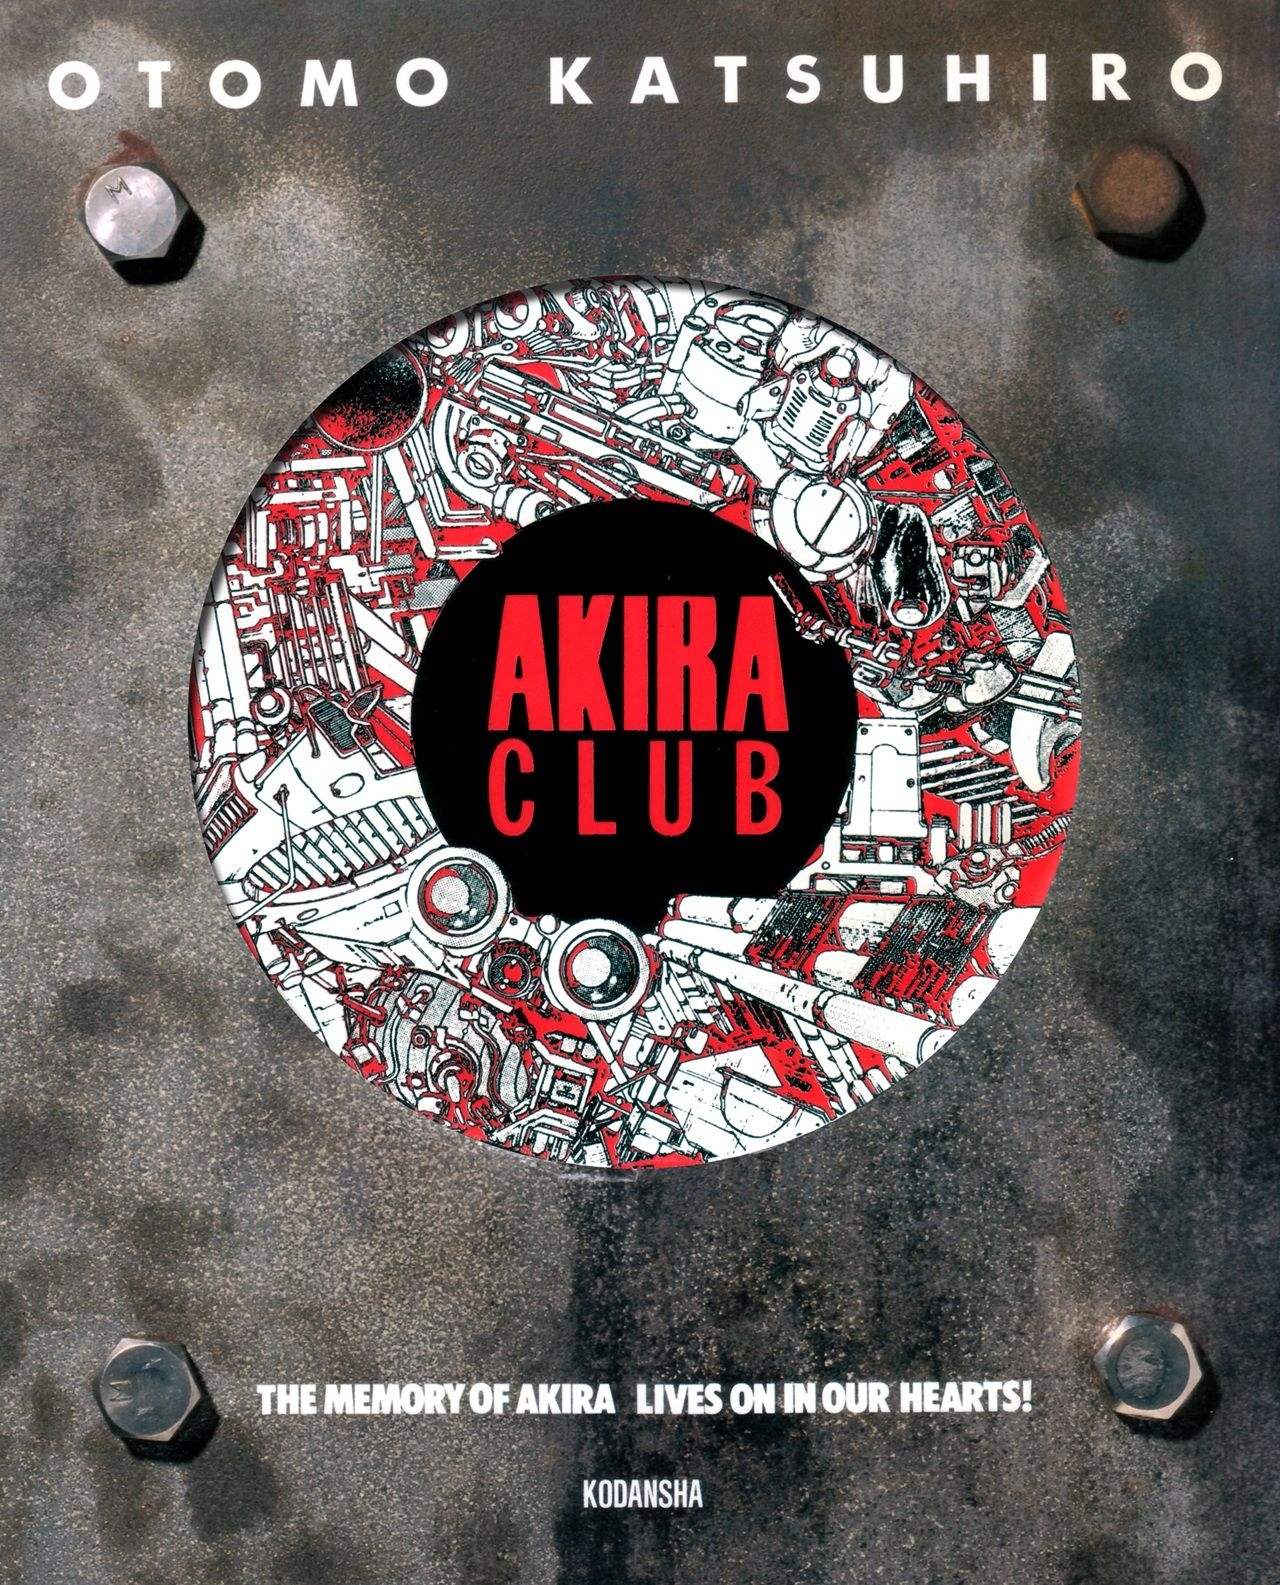 Akira club - The memory of Akira lives on in our hearts! 0